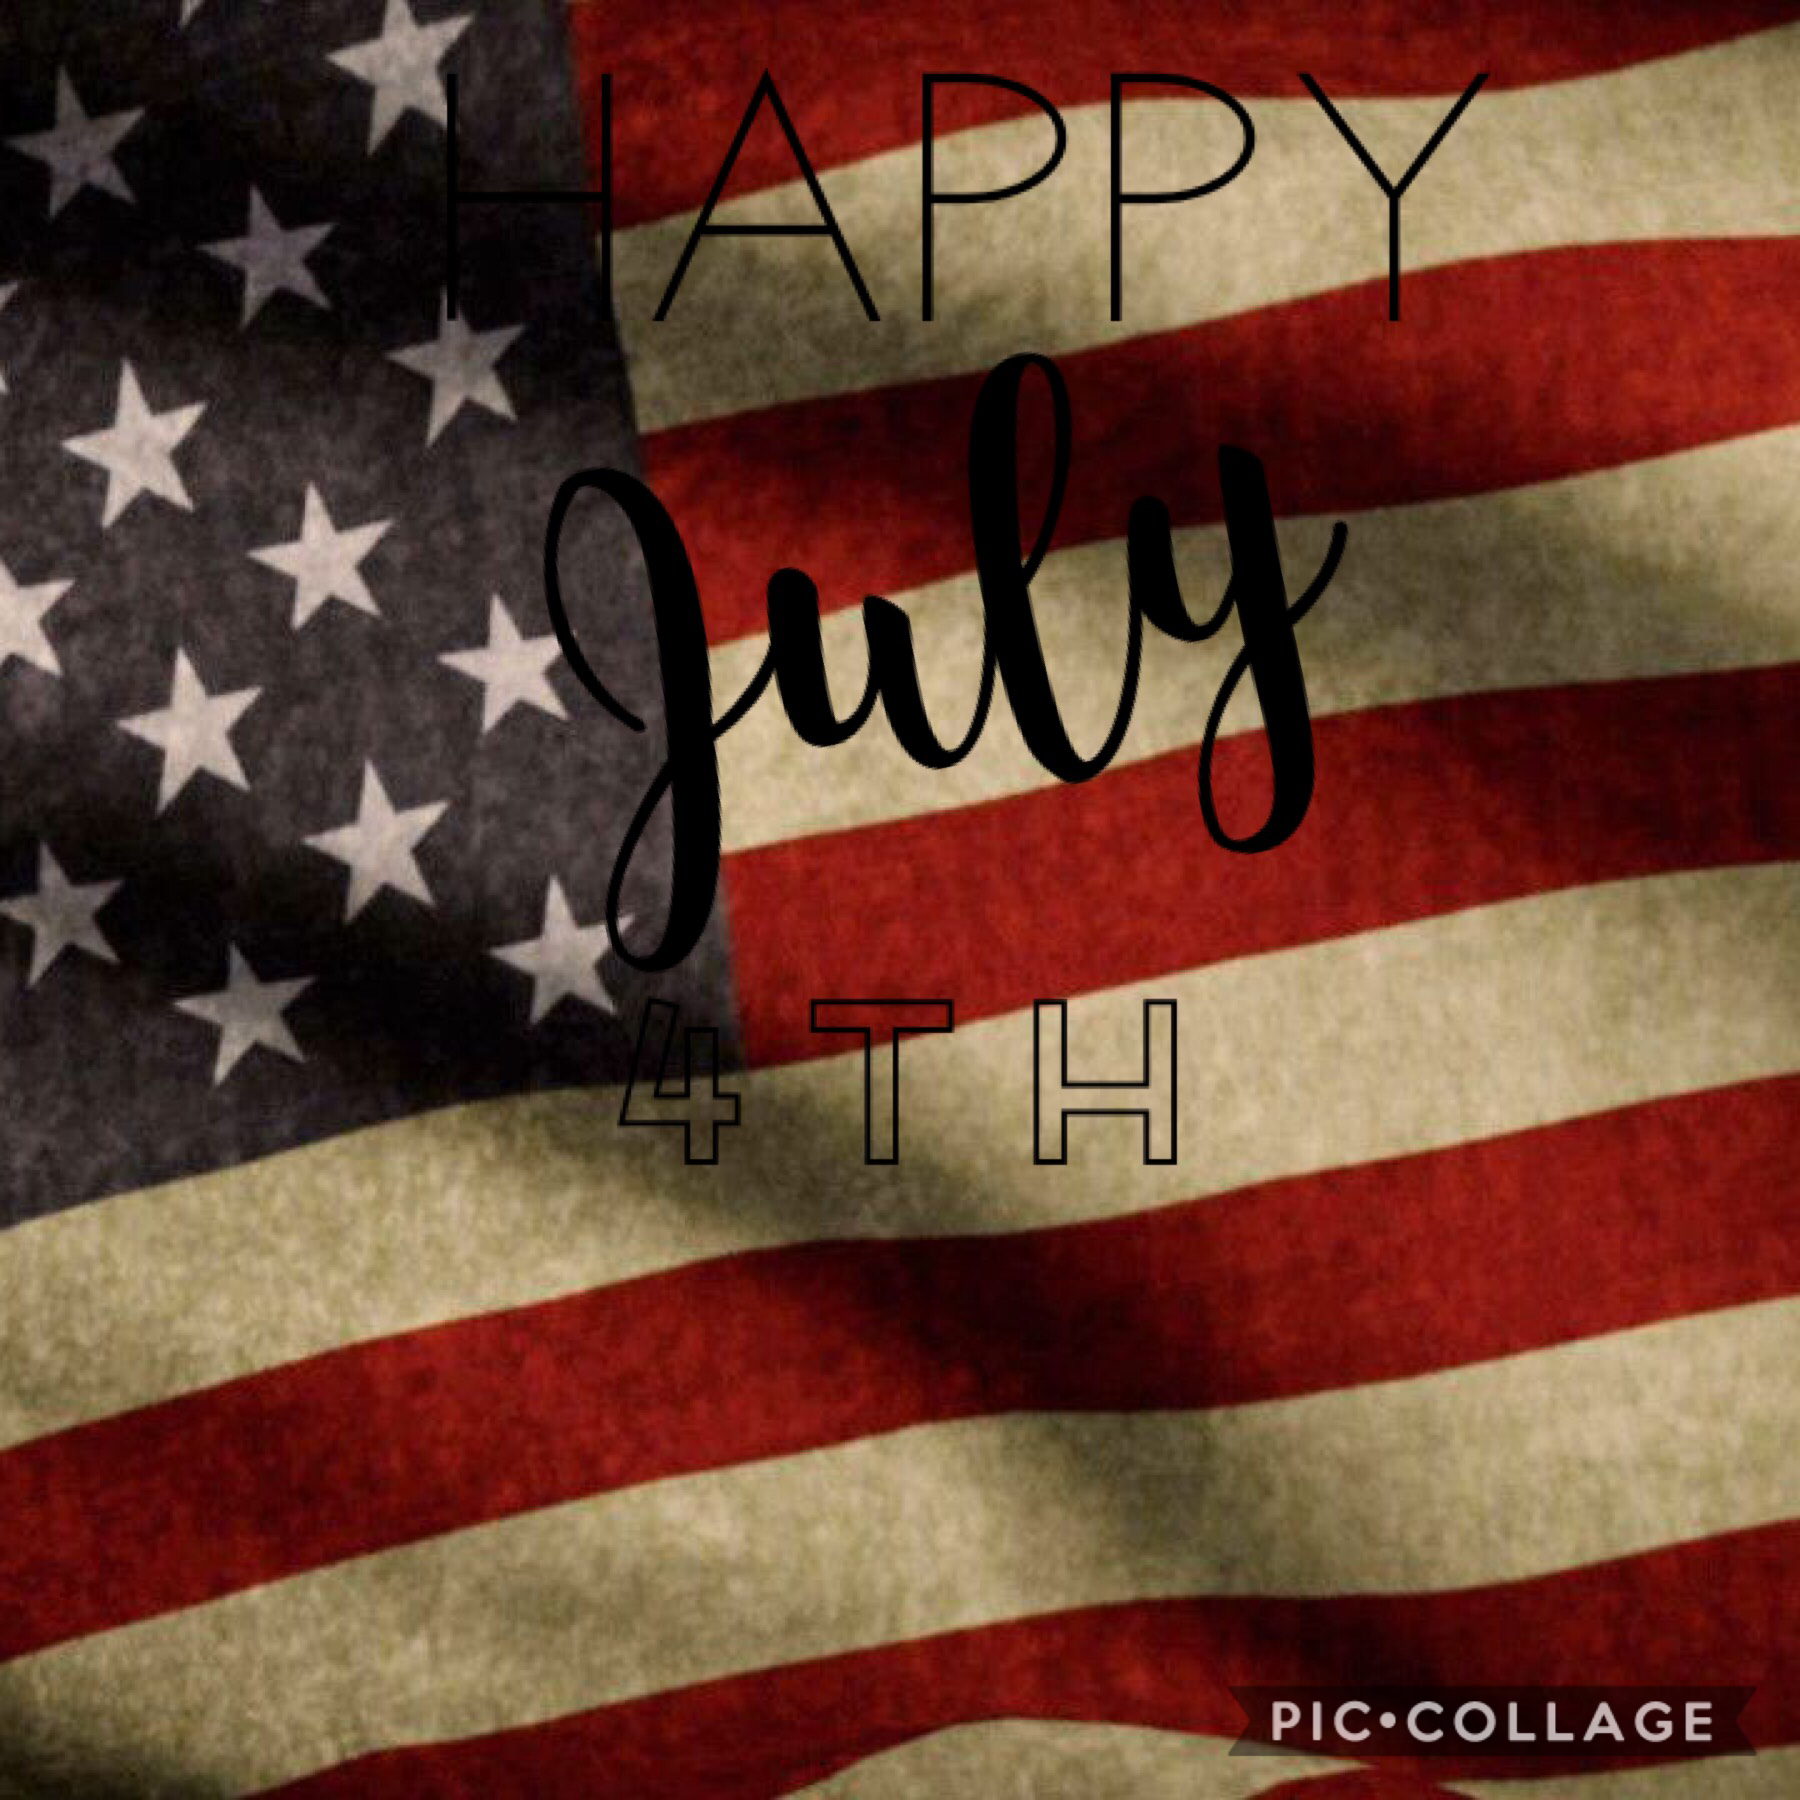 TAP 


I hope you guys have a great July 4th